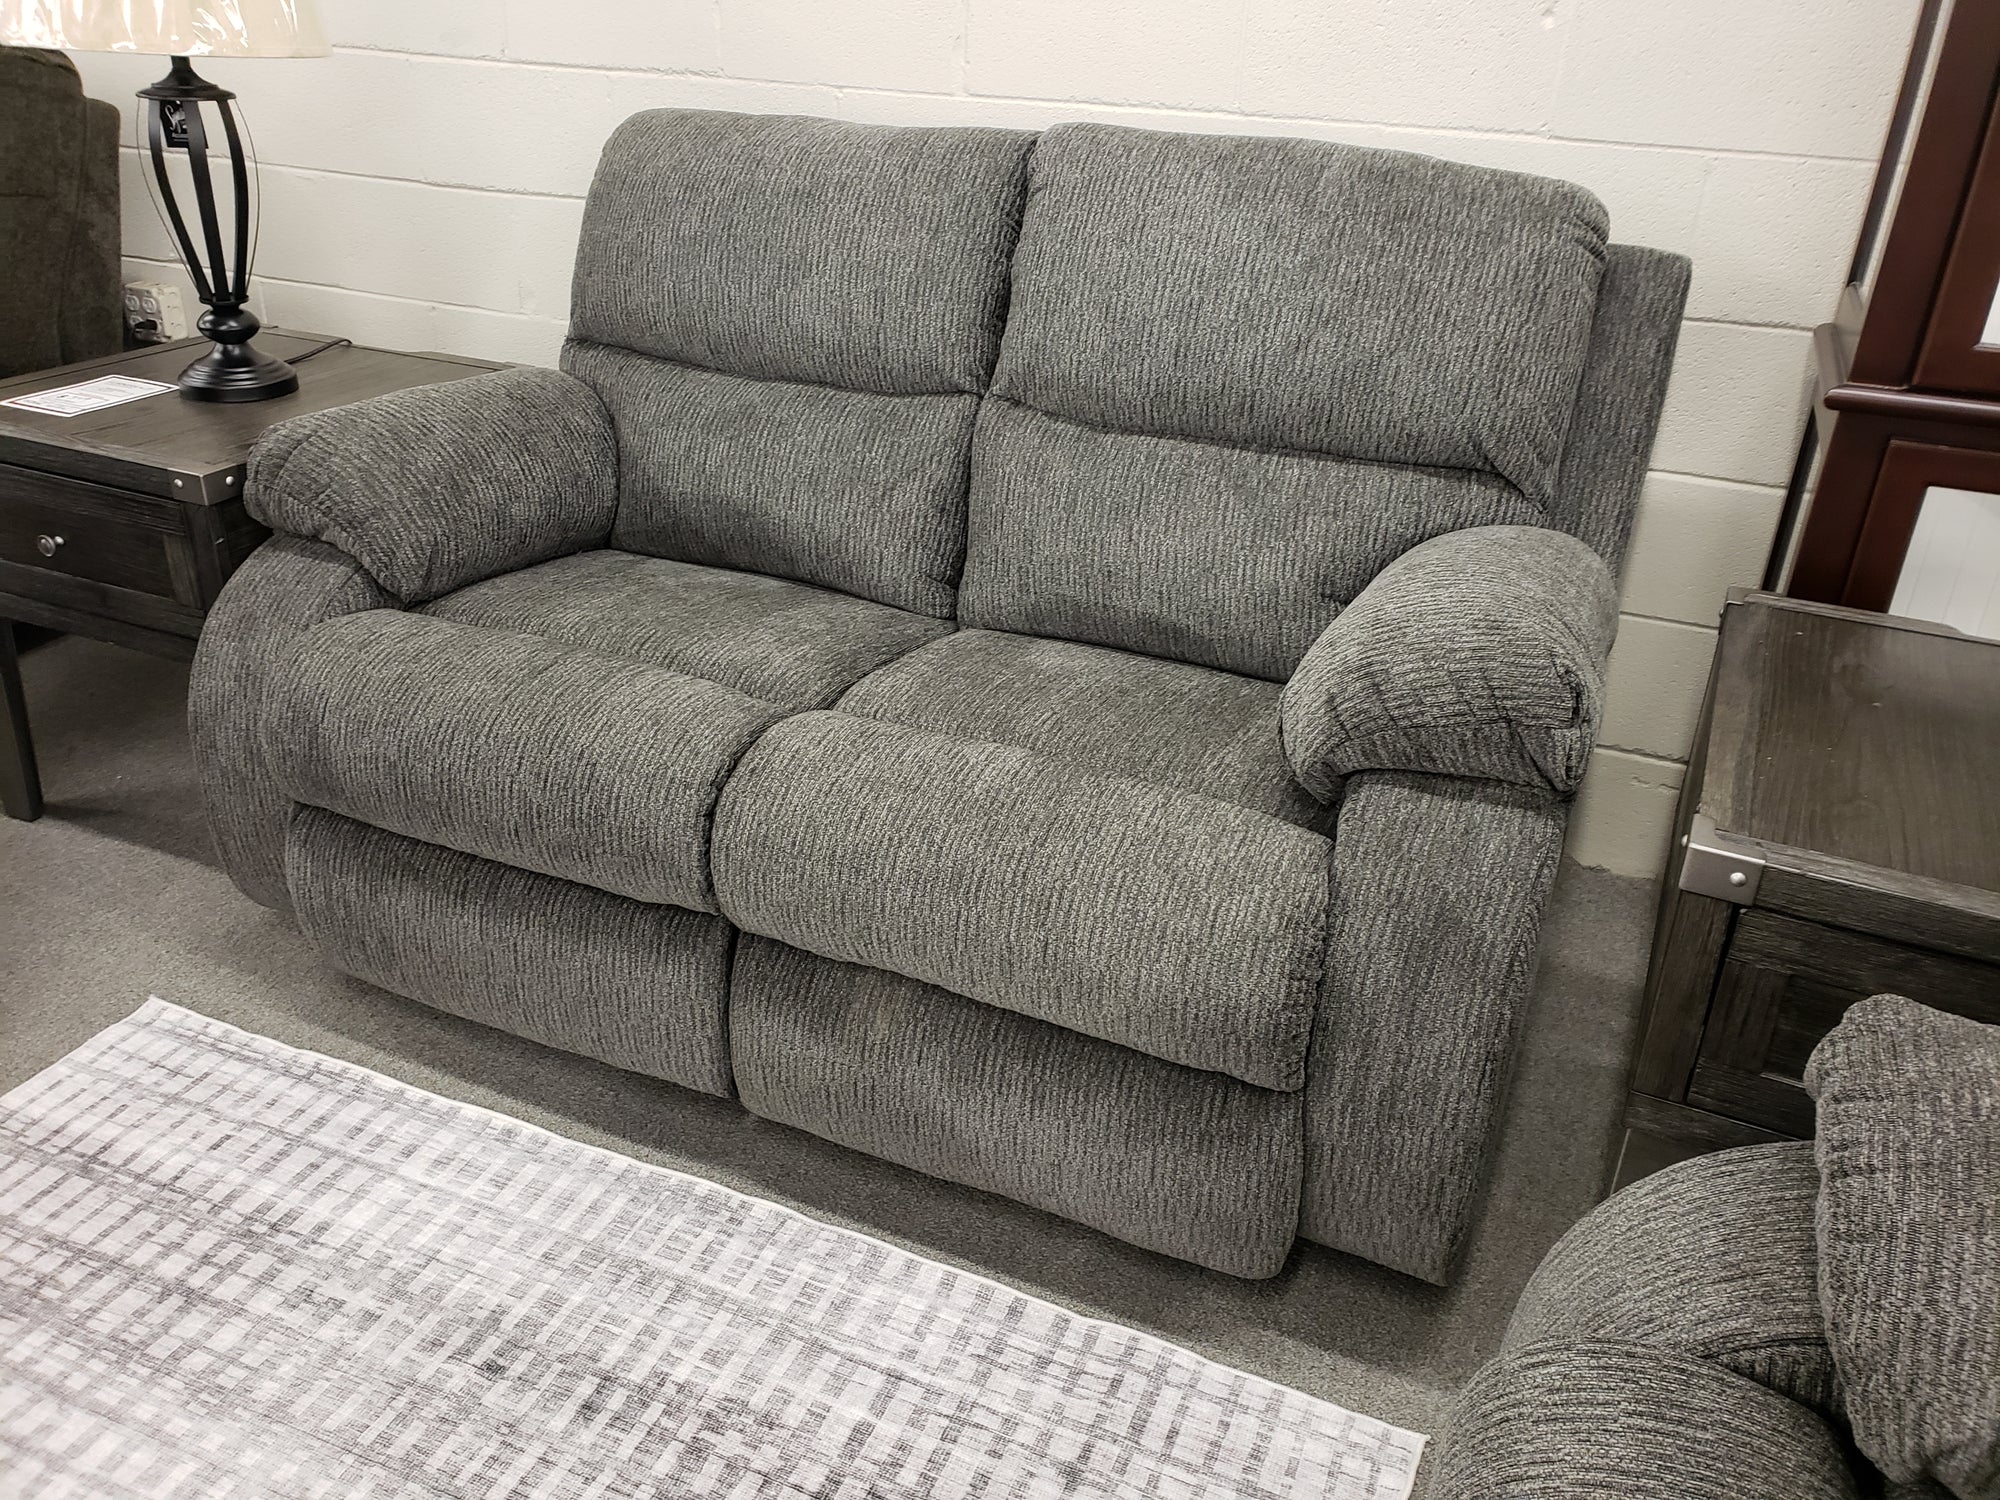 776 FI-A Reclining Sofa And Loveseat